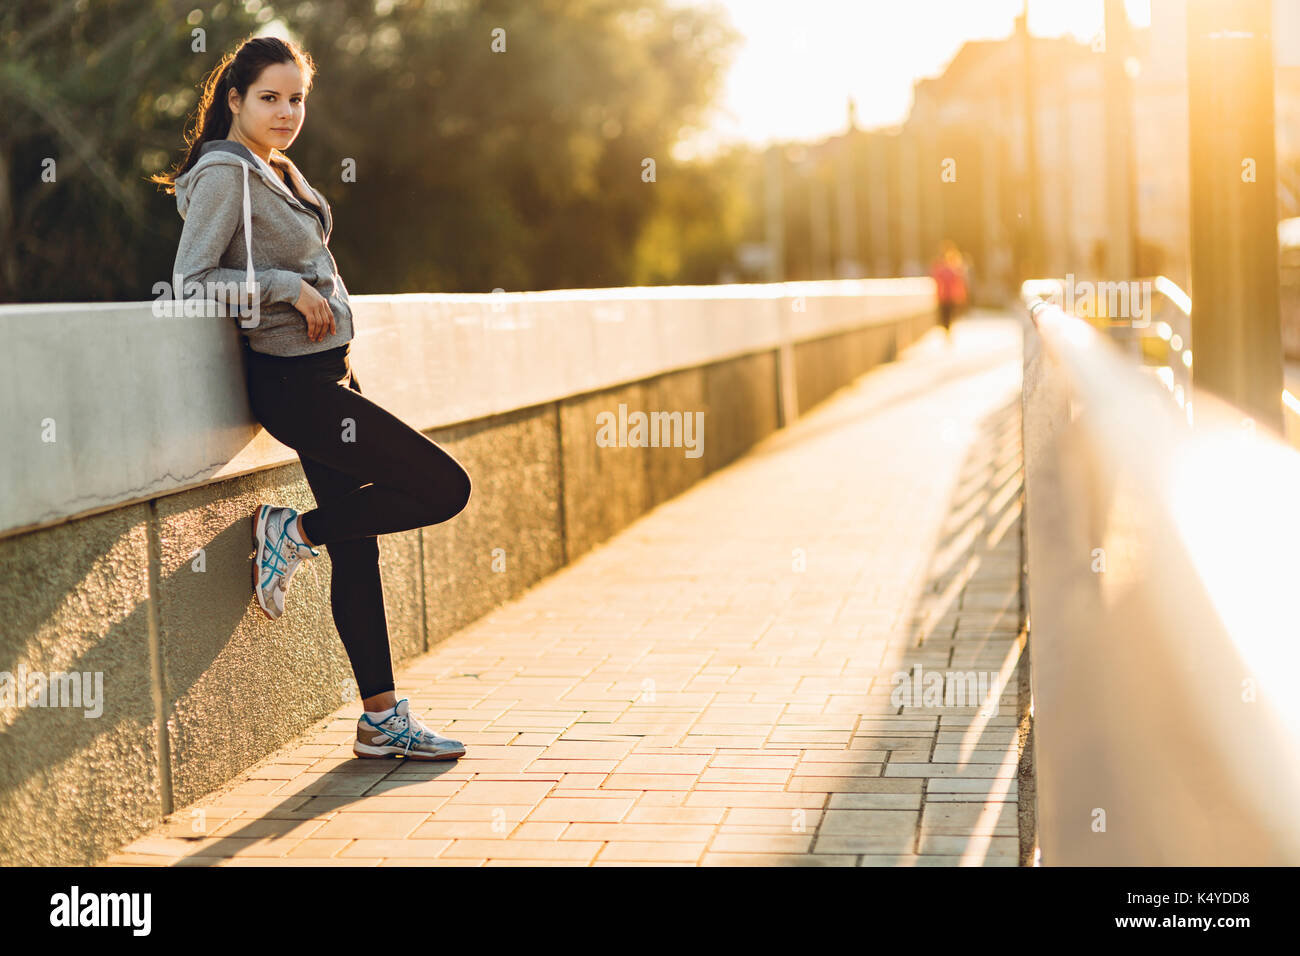 Sportswoman resting after jogging Stock Photo